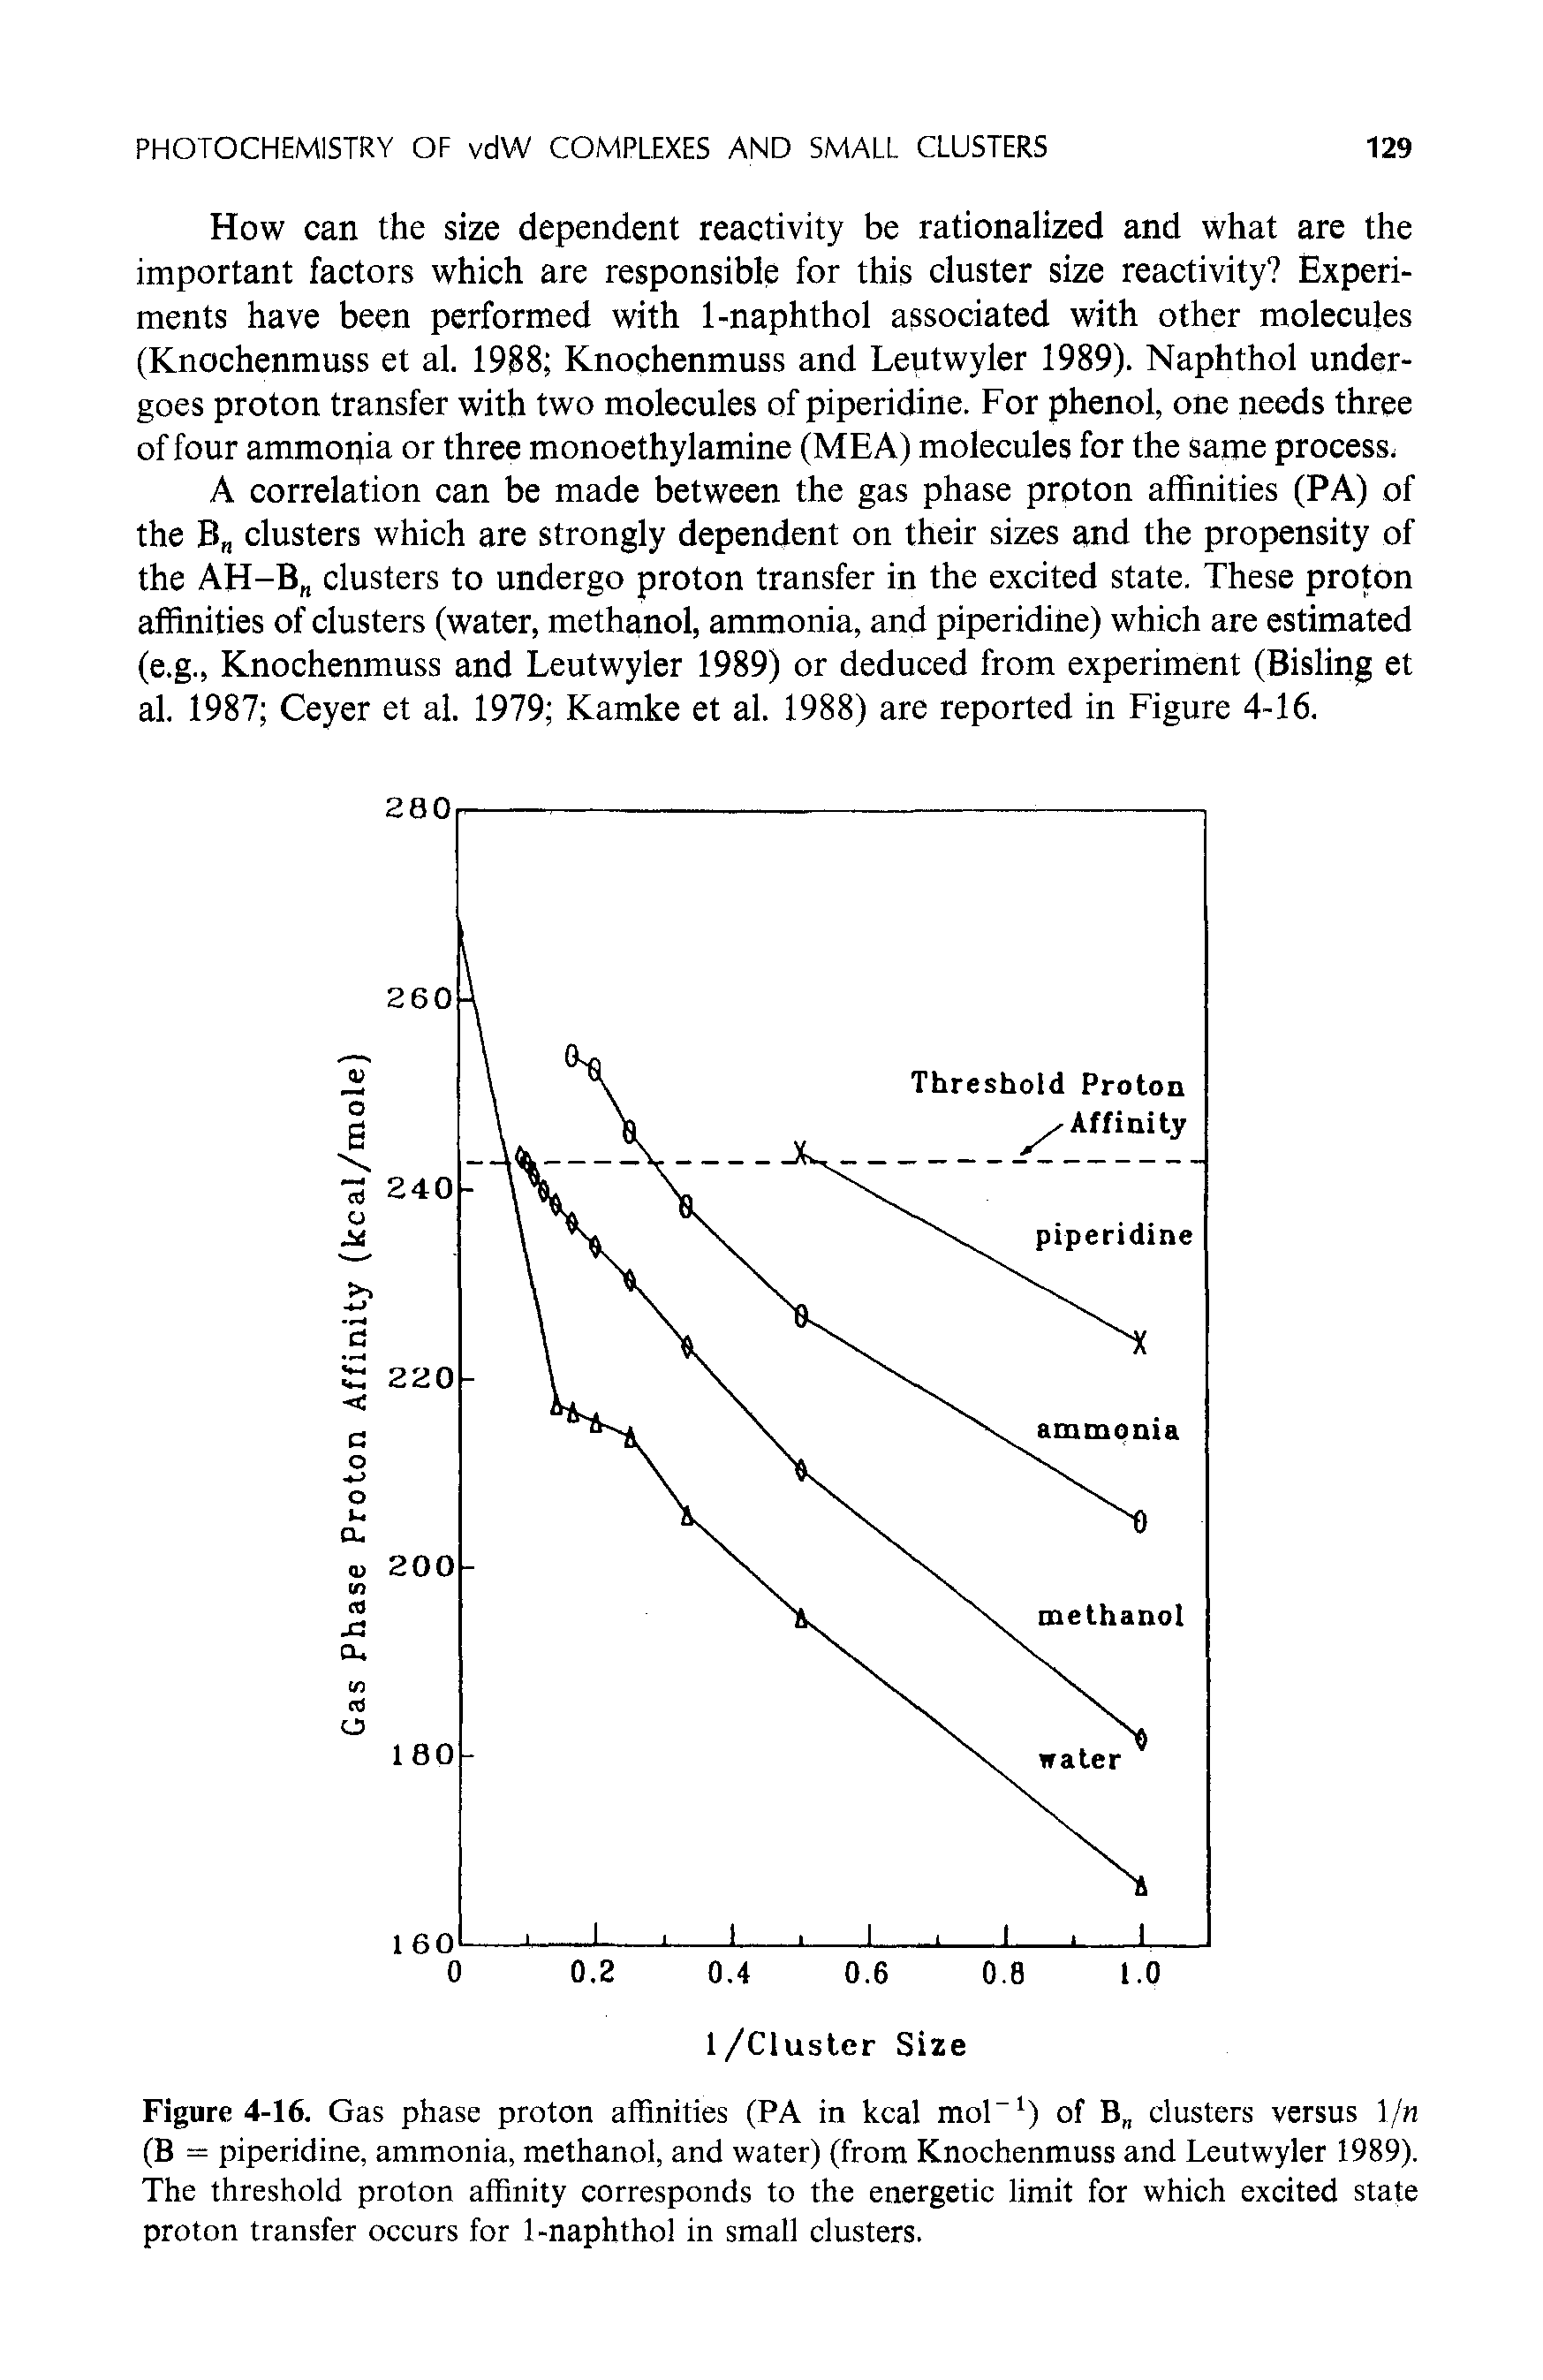 Figure 4-16. Gas phase proton affinities (PA in kcal mol-1) of B clusters versus /n (B = piperidine, ammonia, methanol, and water) (from Knochenmuss and Leutwyler 1989). The threshold proton affinity corresponds to the energetic limit for which excited state proton transfer occurs for 1-naphthol in small clusters.